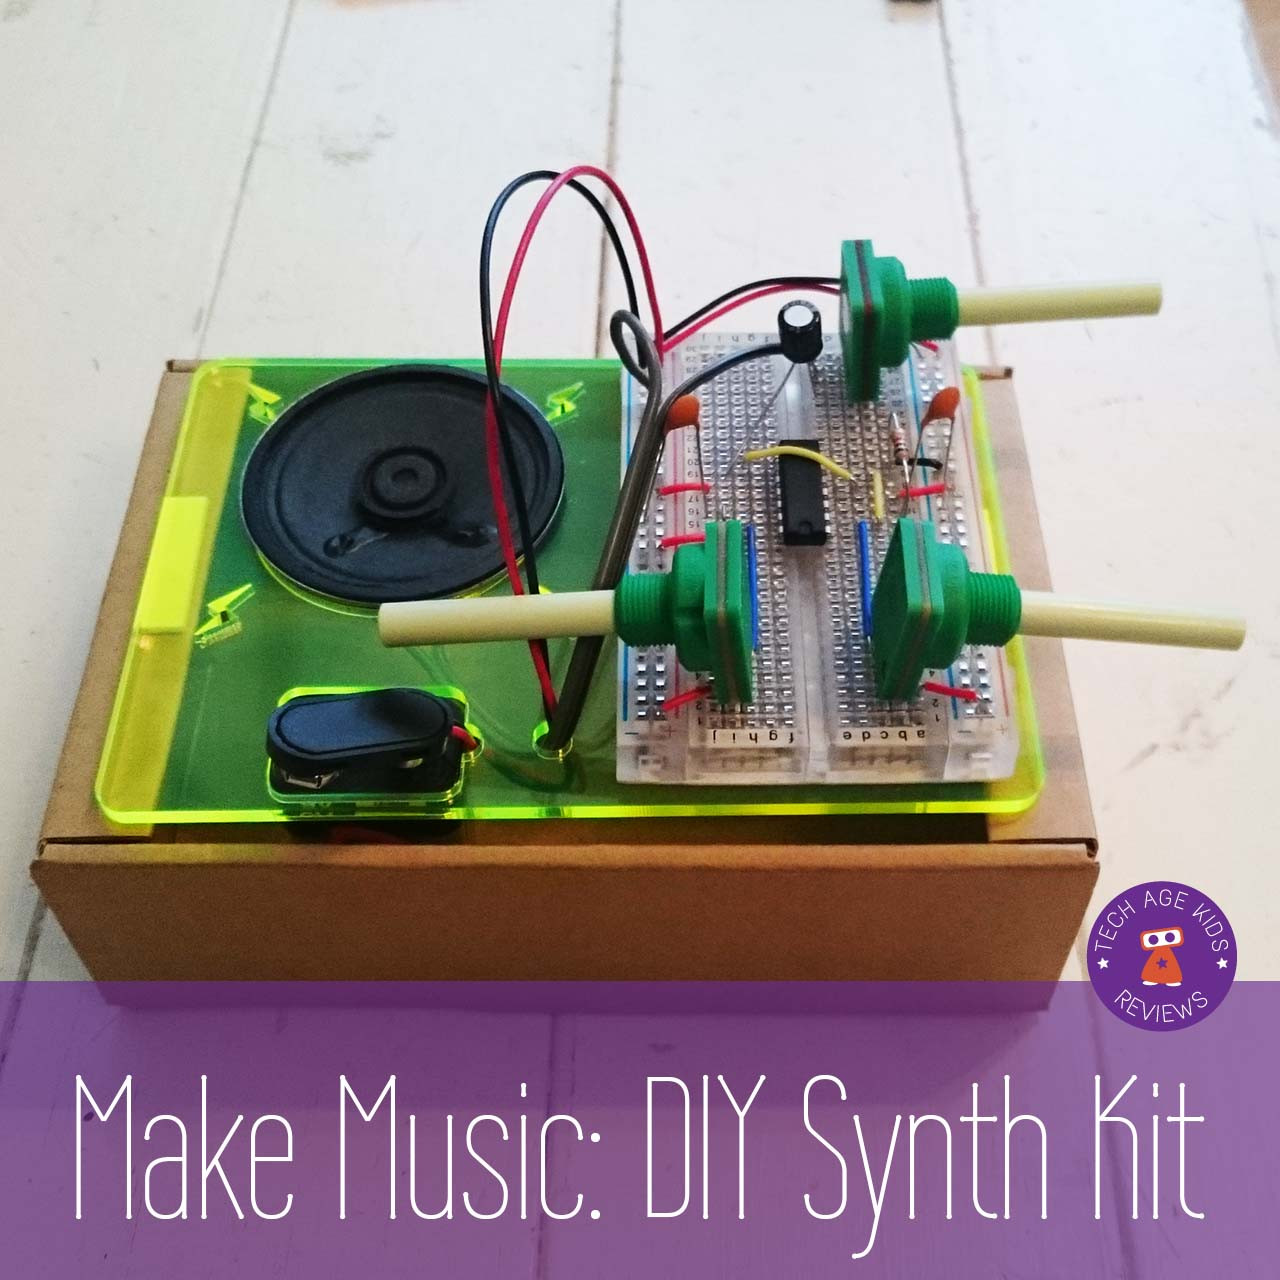 DIY Synth Kit
 Make your own Music with DIY Synth Kit